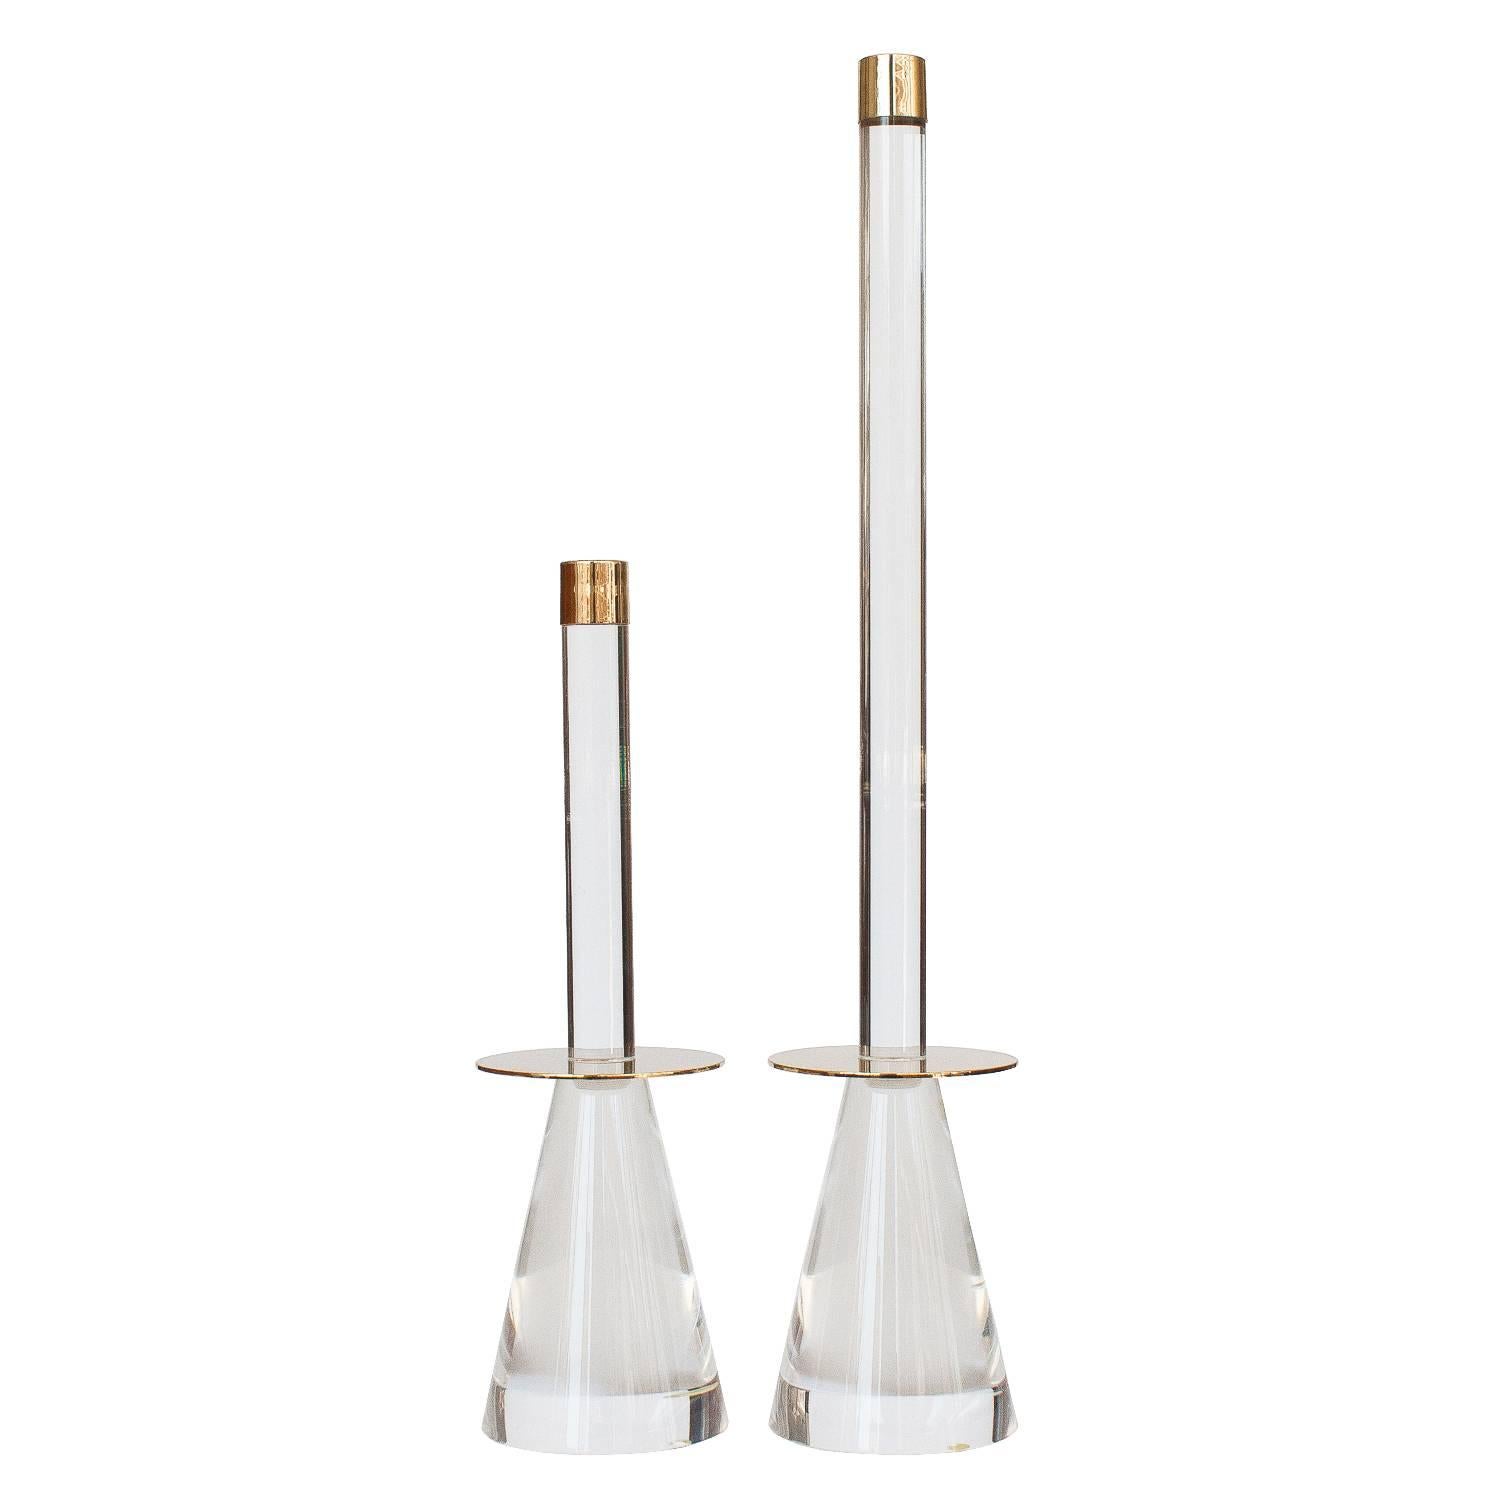 Pair of Lucite and Brass Candlesticks